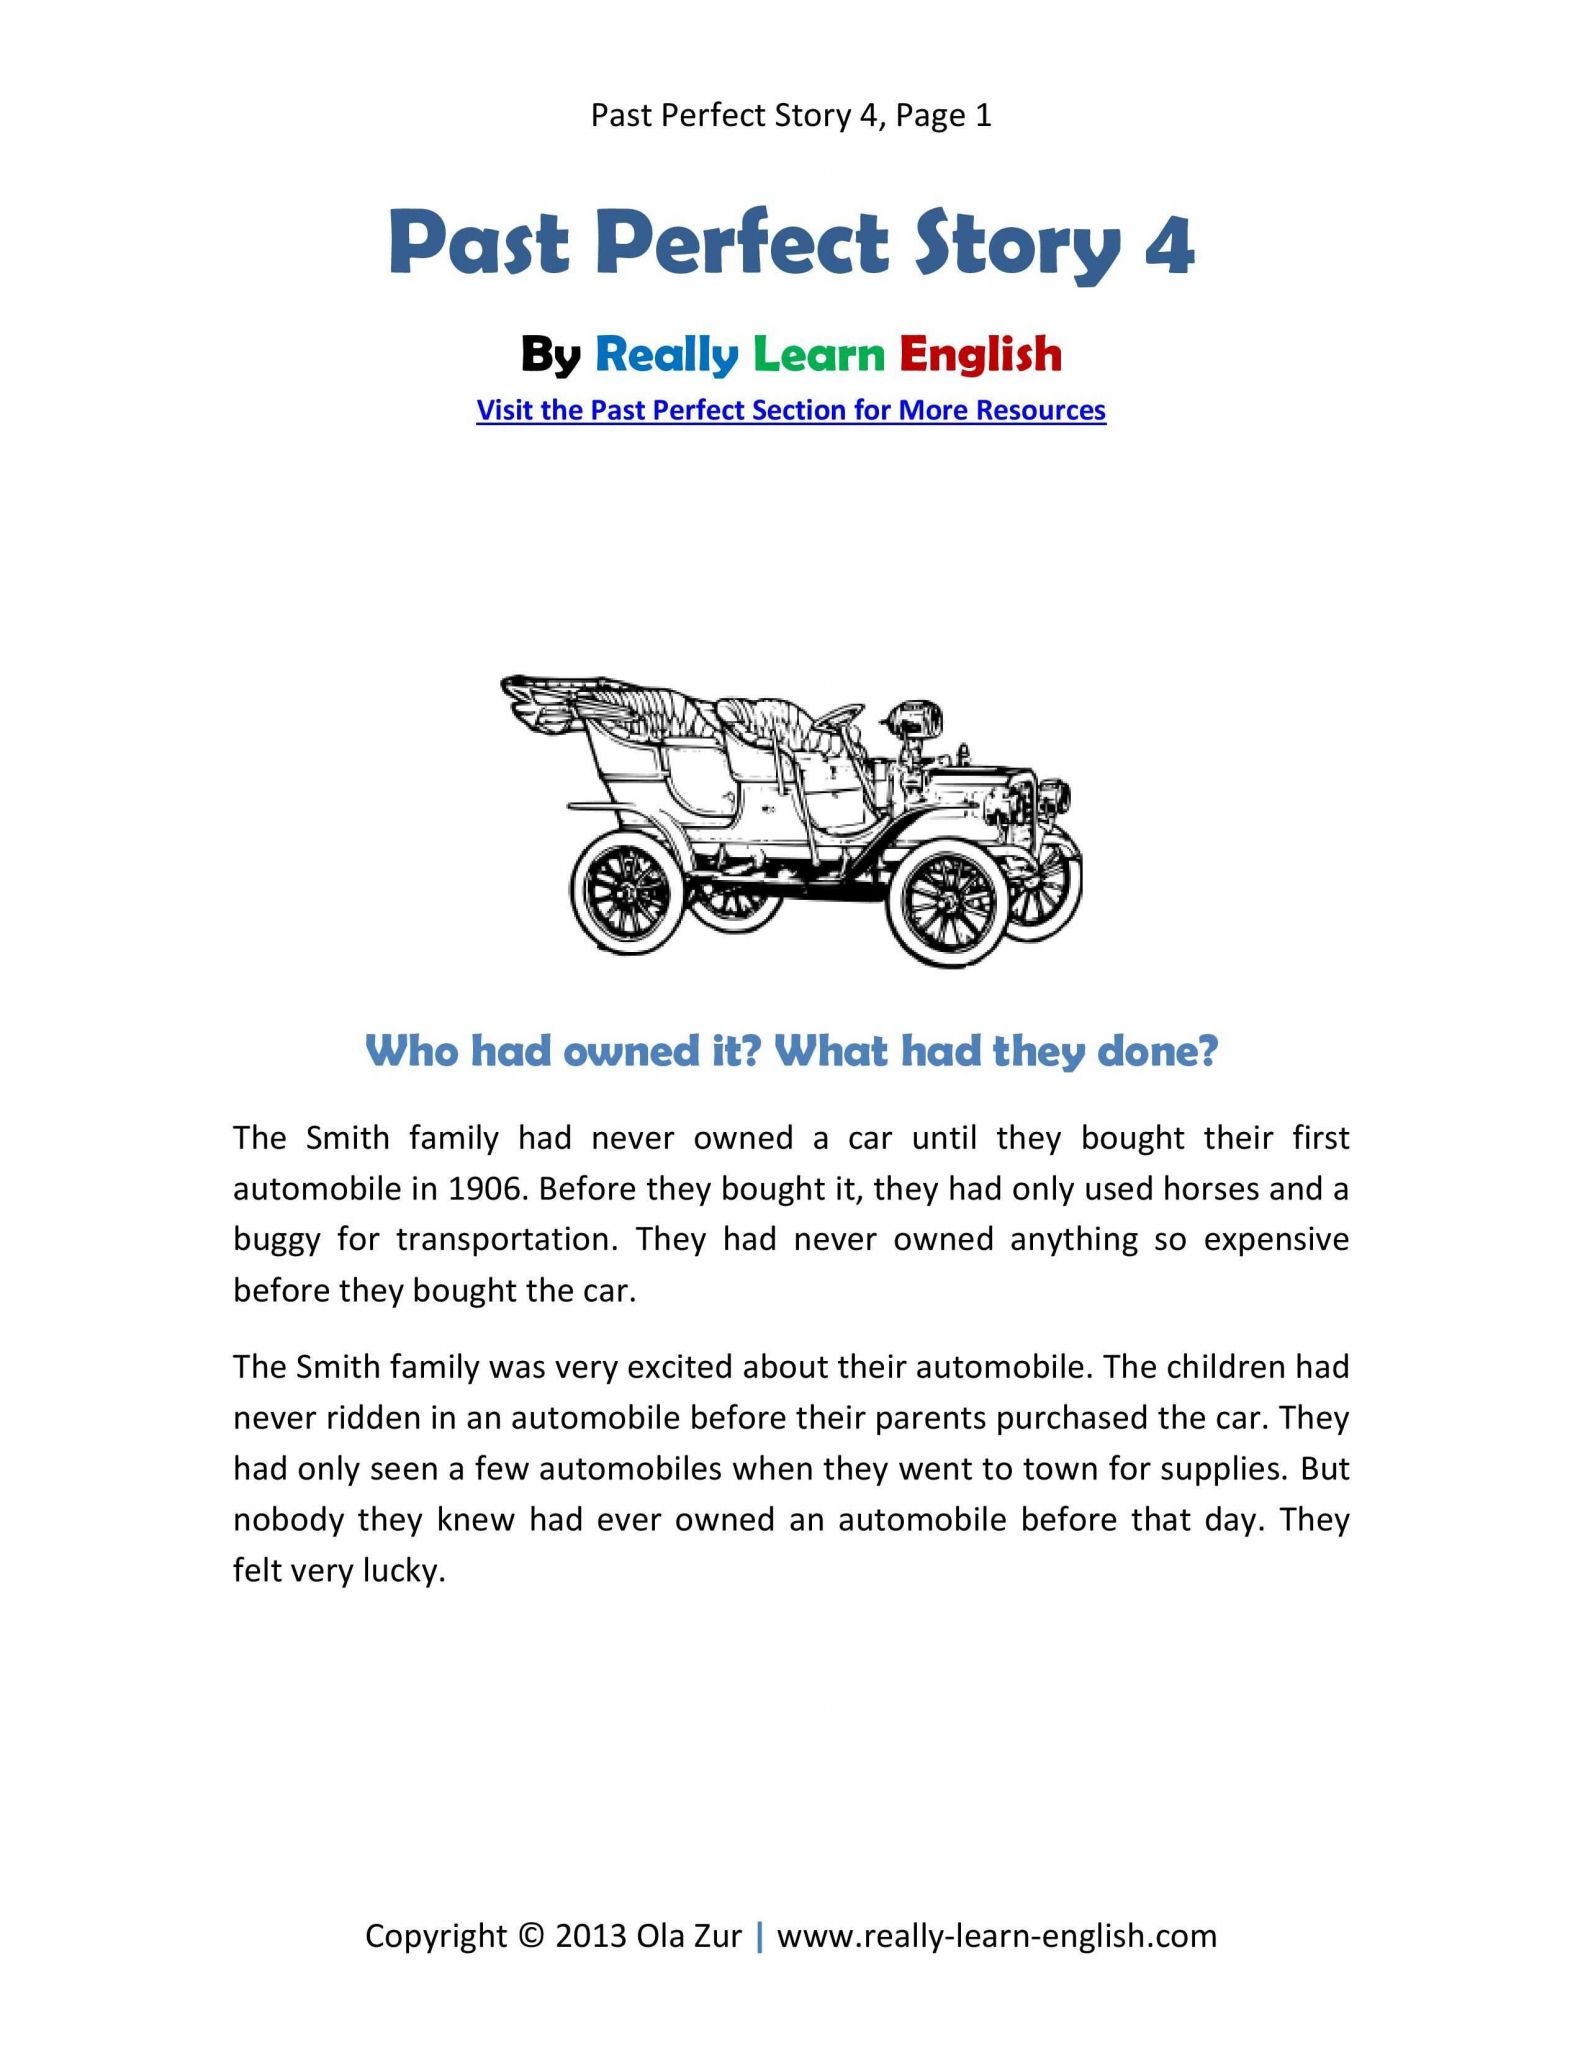 English Worksheets Exercises or Free Printable Story and Worksheets to Practice the English Past